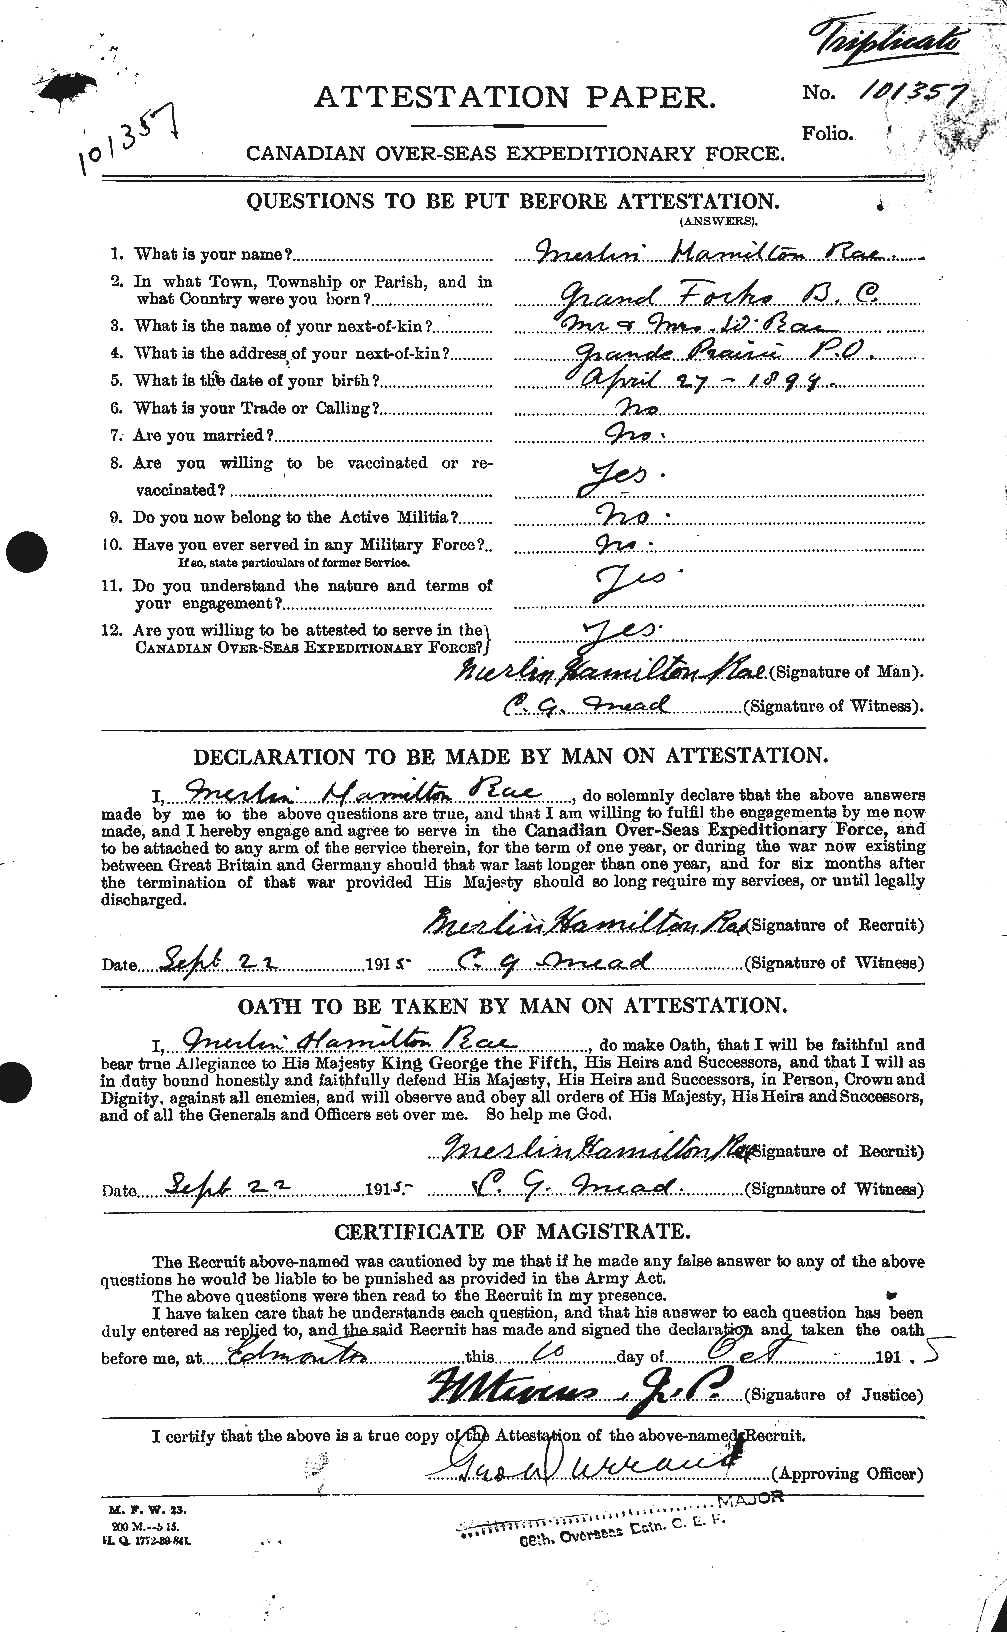 Personnel Records of the First World War - CEF 591266a